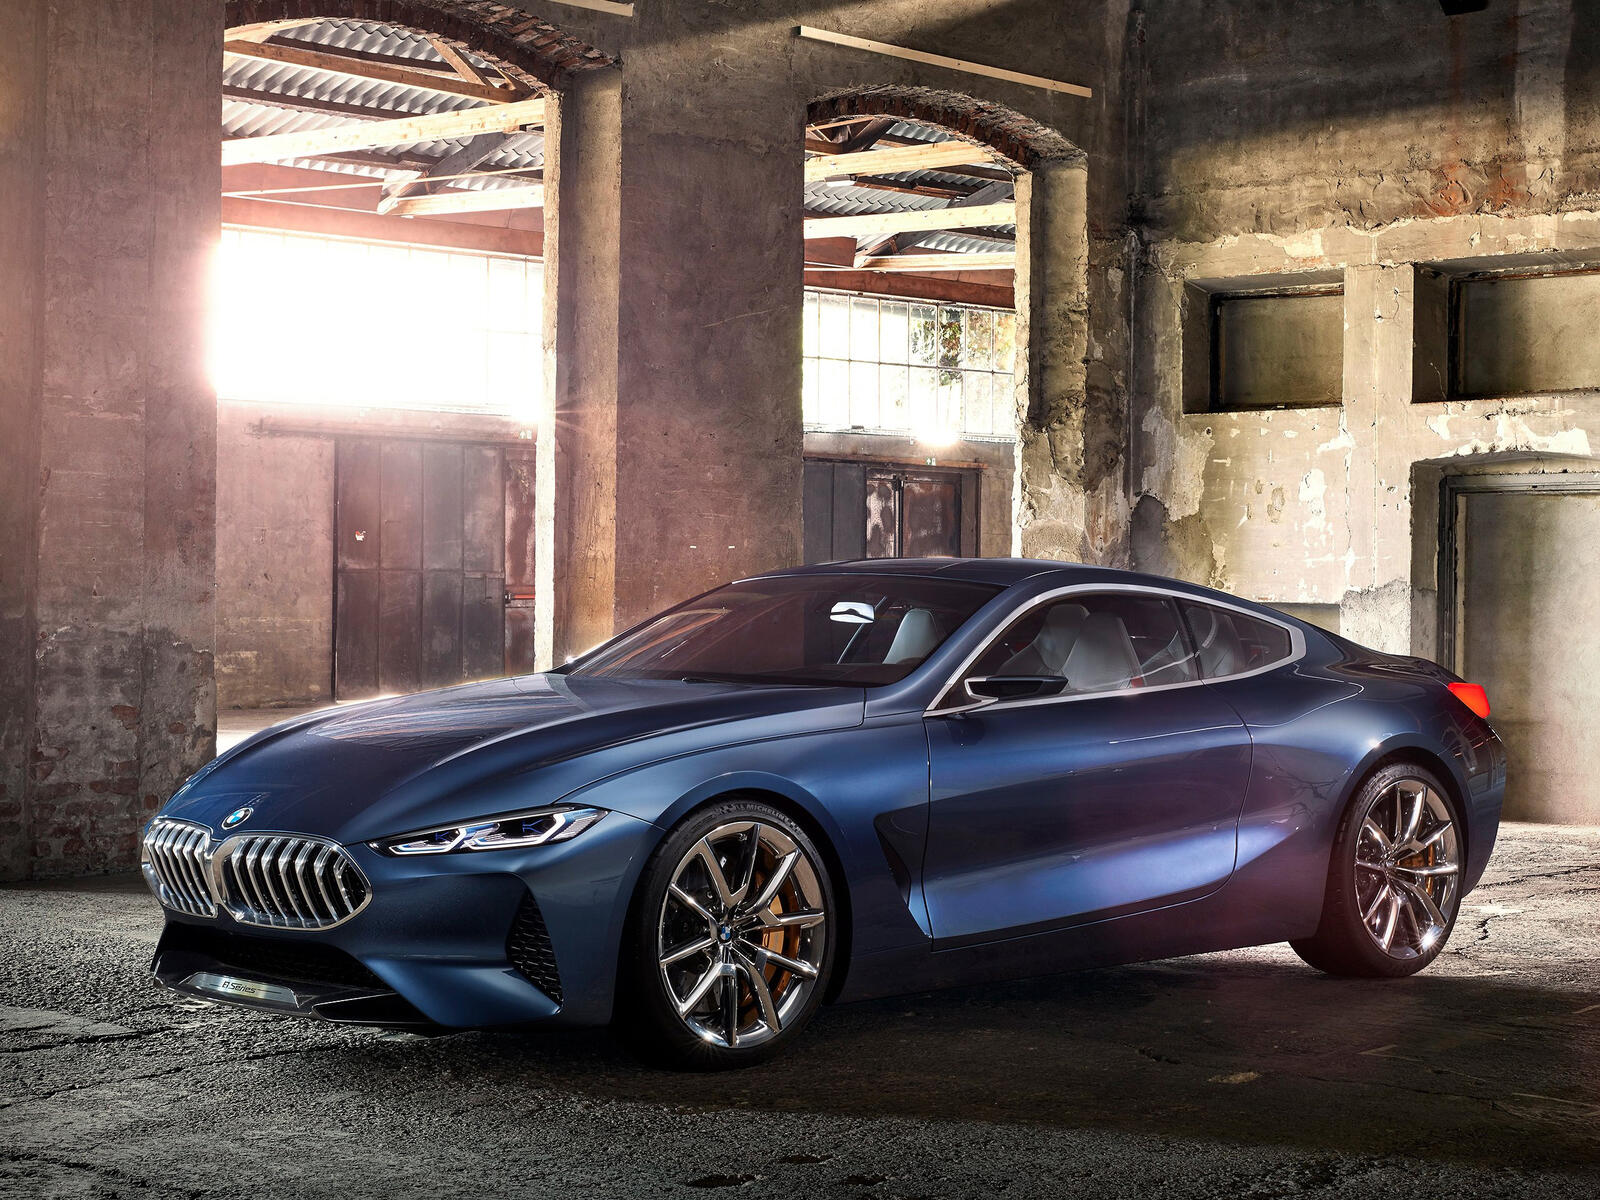 Free photo Picture of a bmw 8 series in an old hangar.